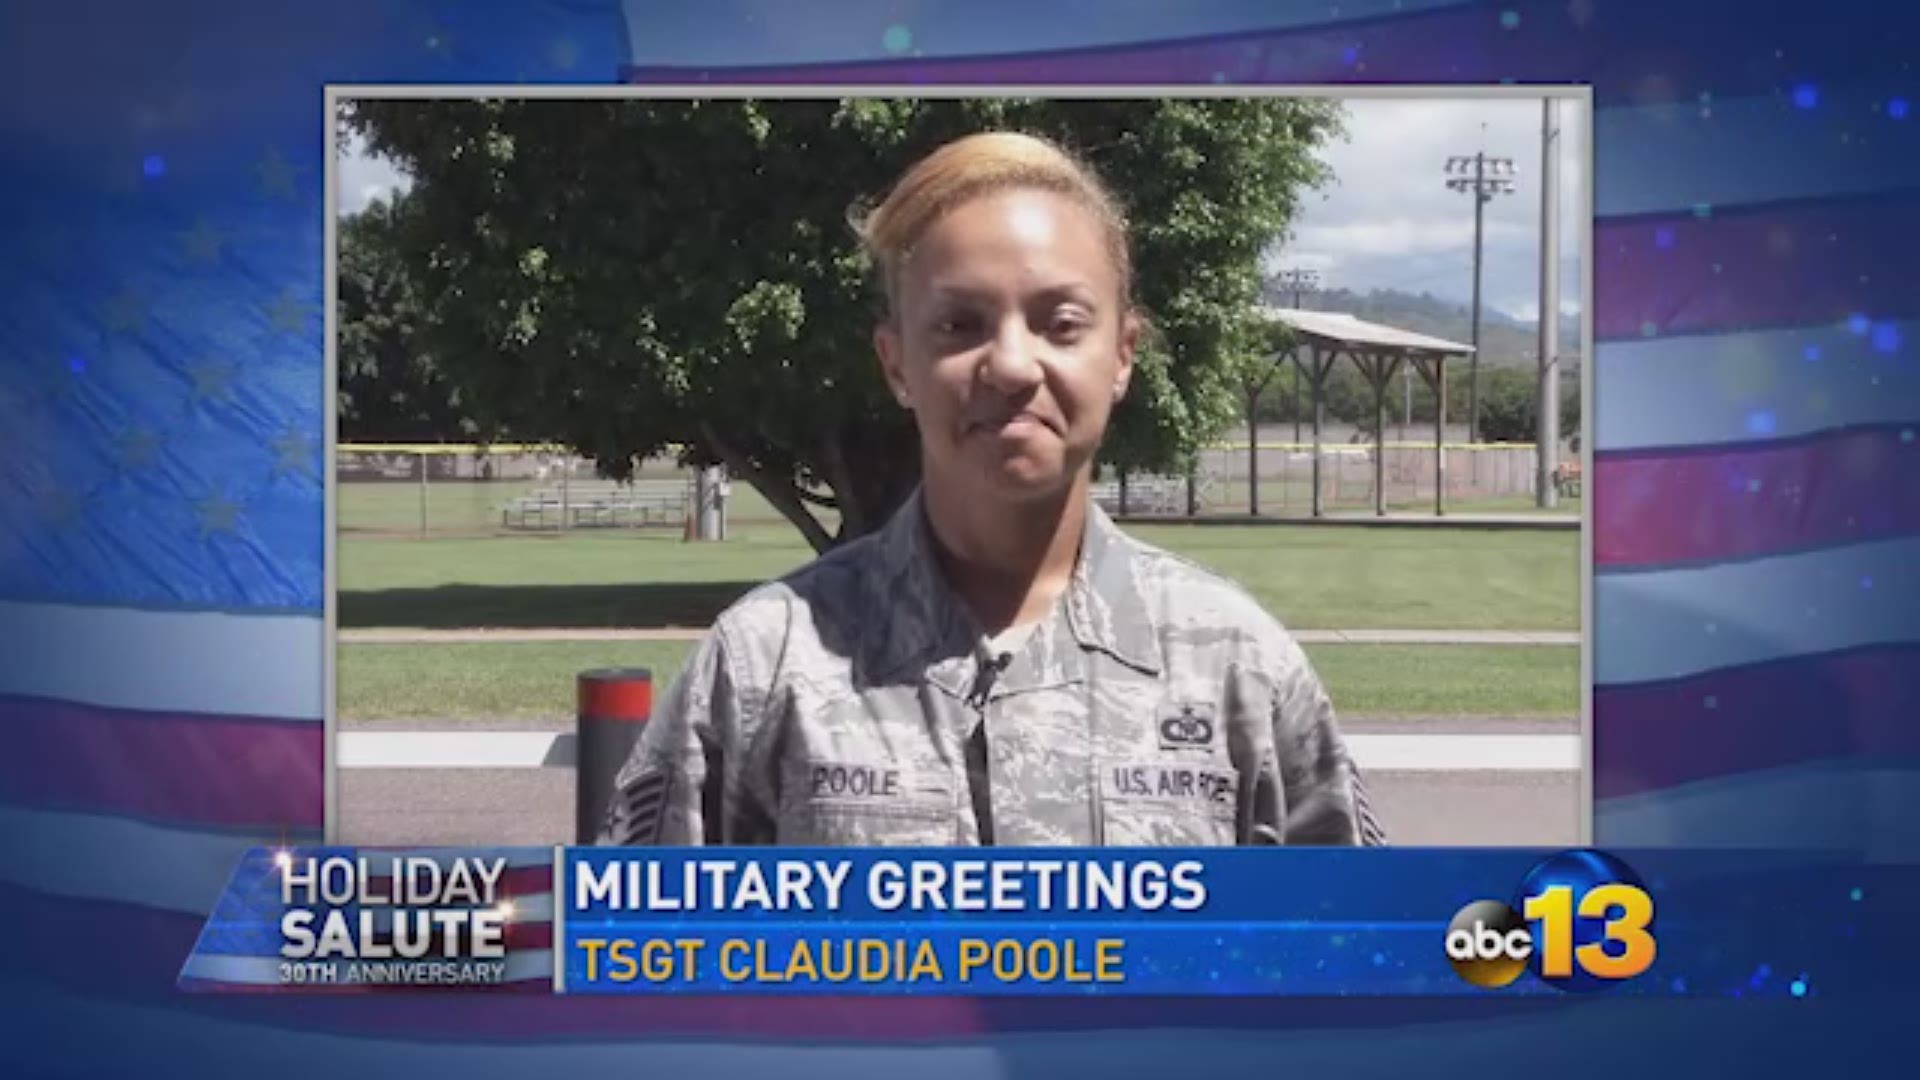 Military Greetings from the Graham Family, and TSGT Claudia Poole.